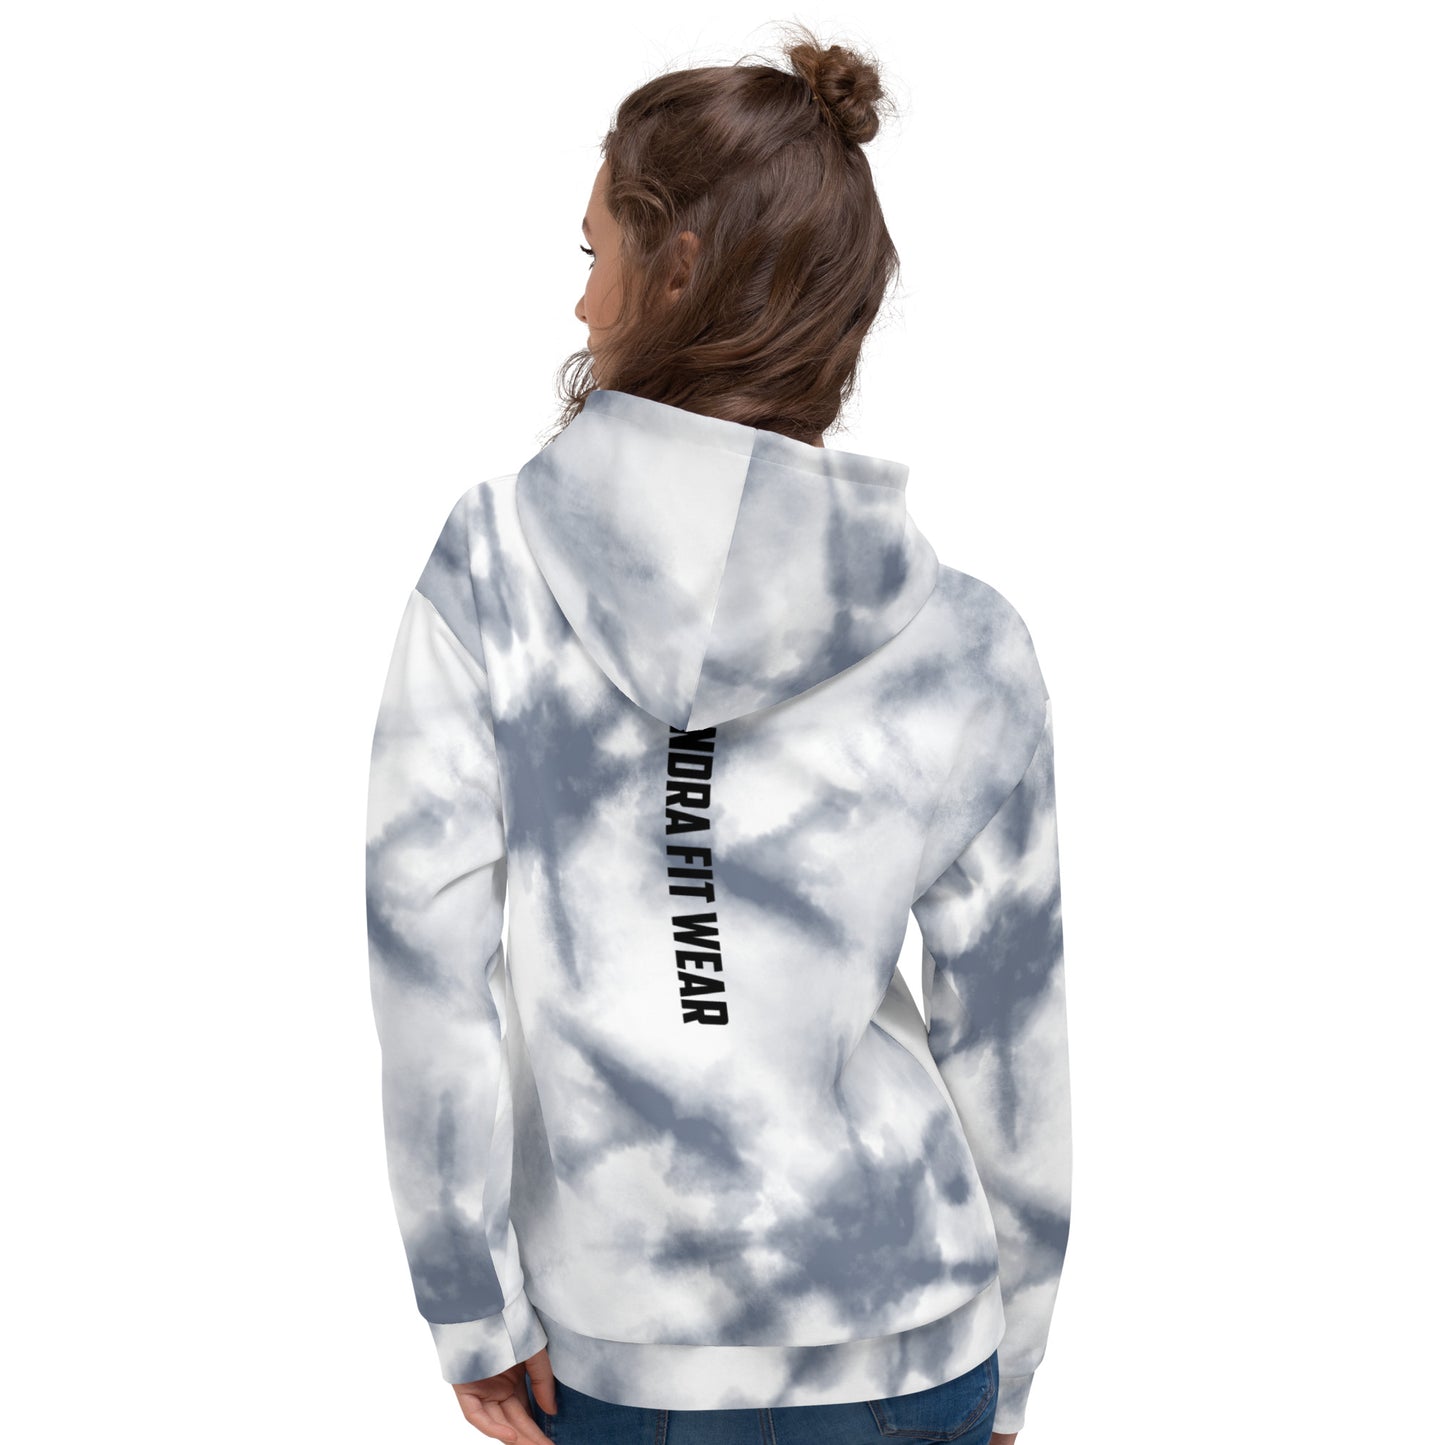 Unisex Hoodie/ all over print/londra fit wear